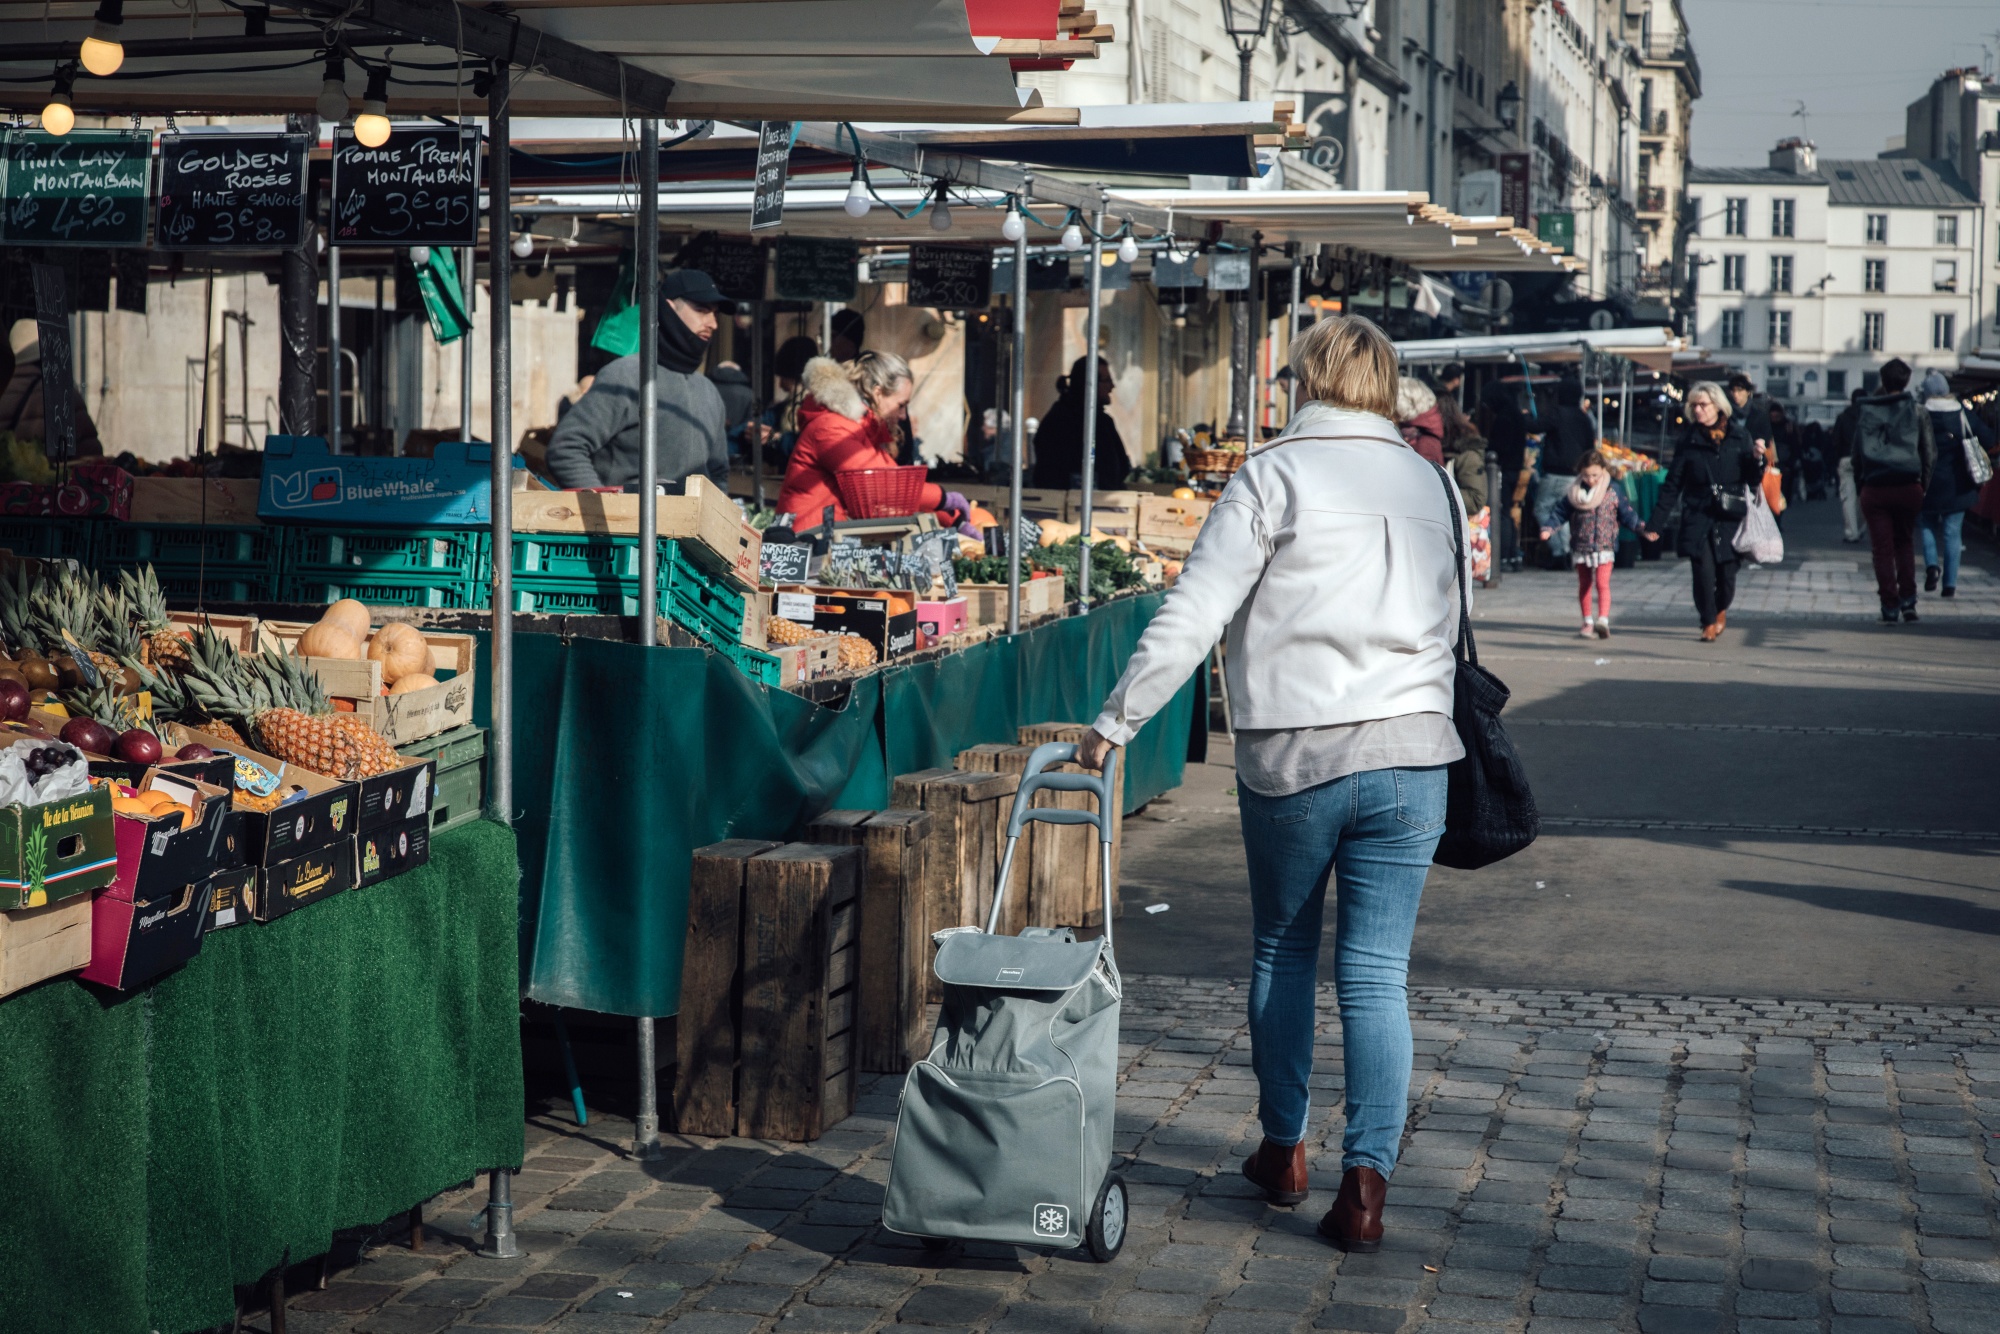 A shopper pulls a trolley bag past past fruit and vegetable stalls in the Bauveau Market in Paris, France.